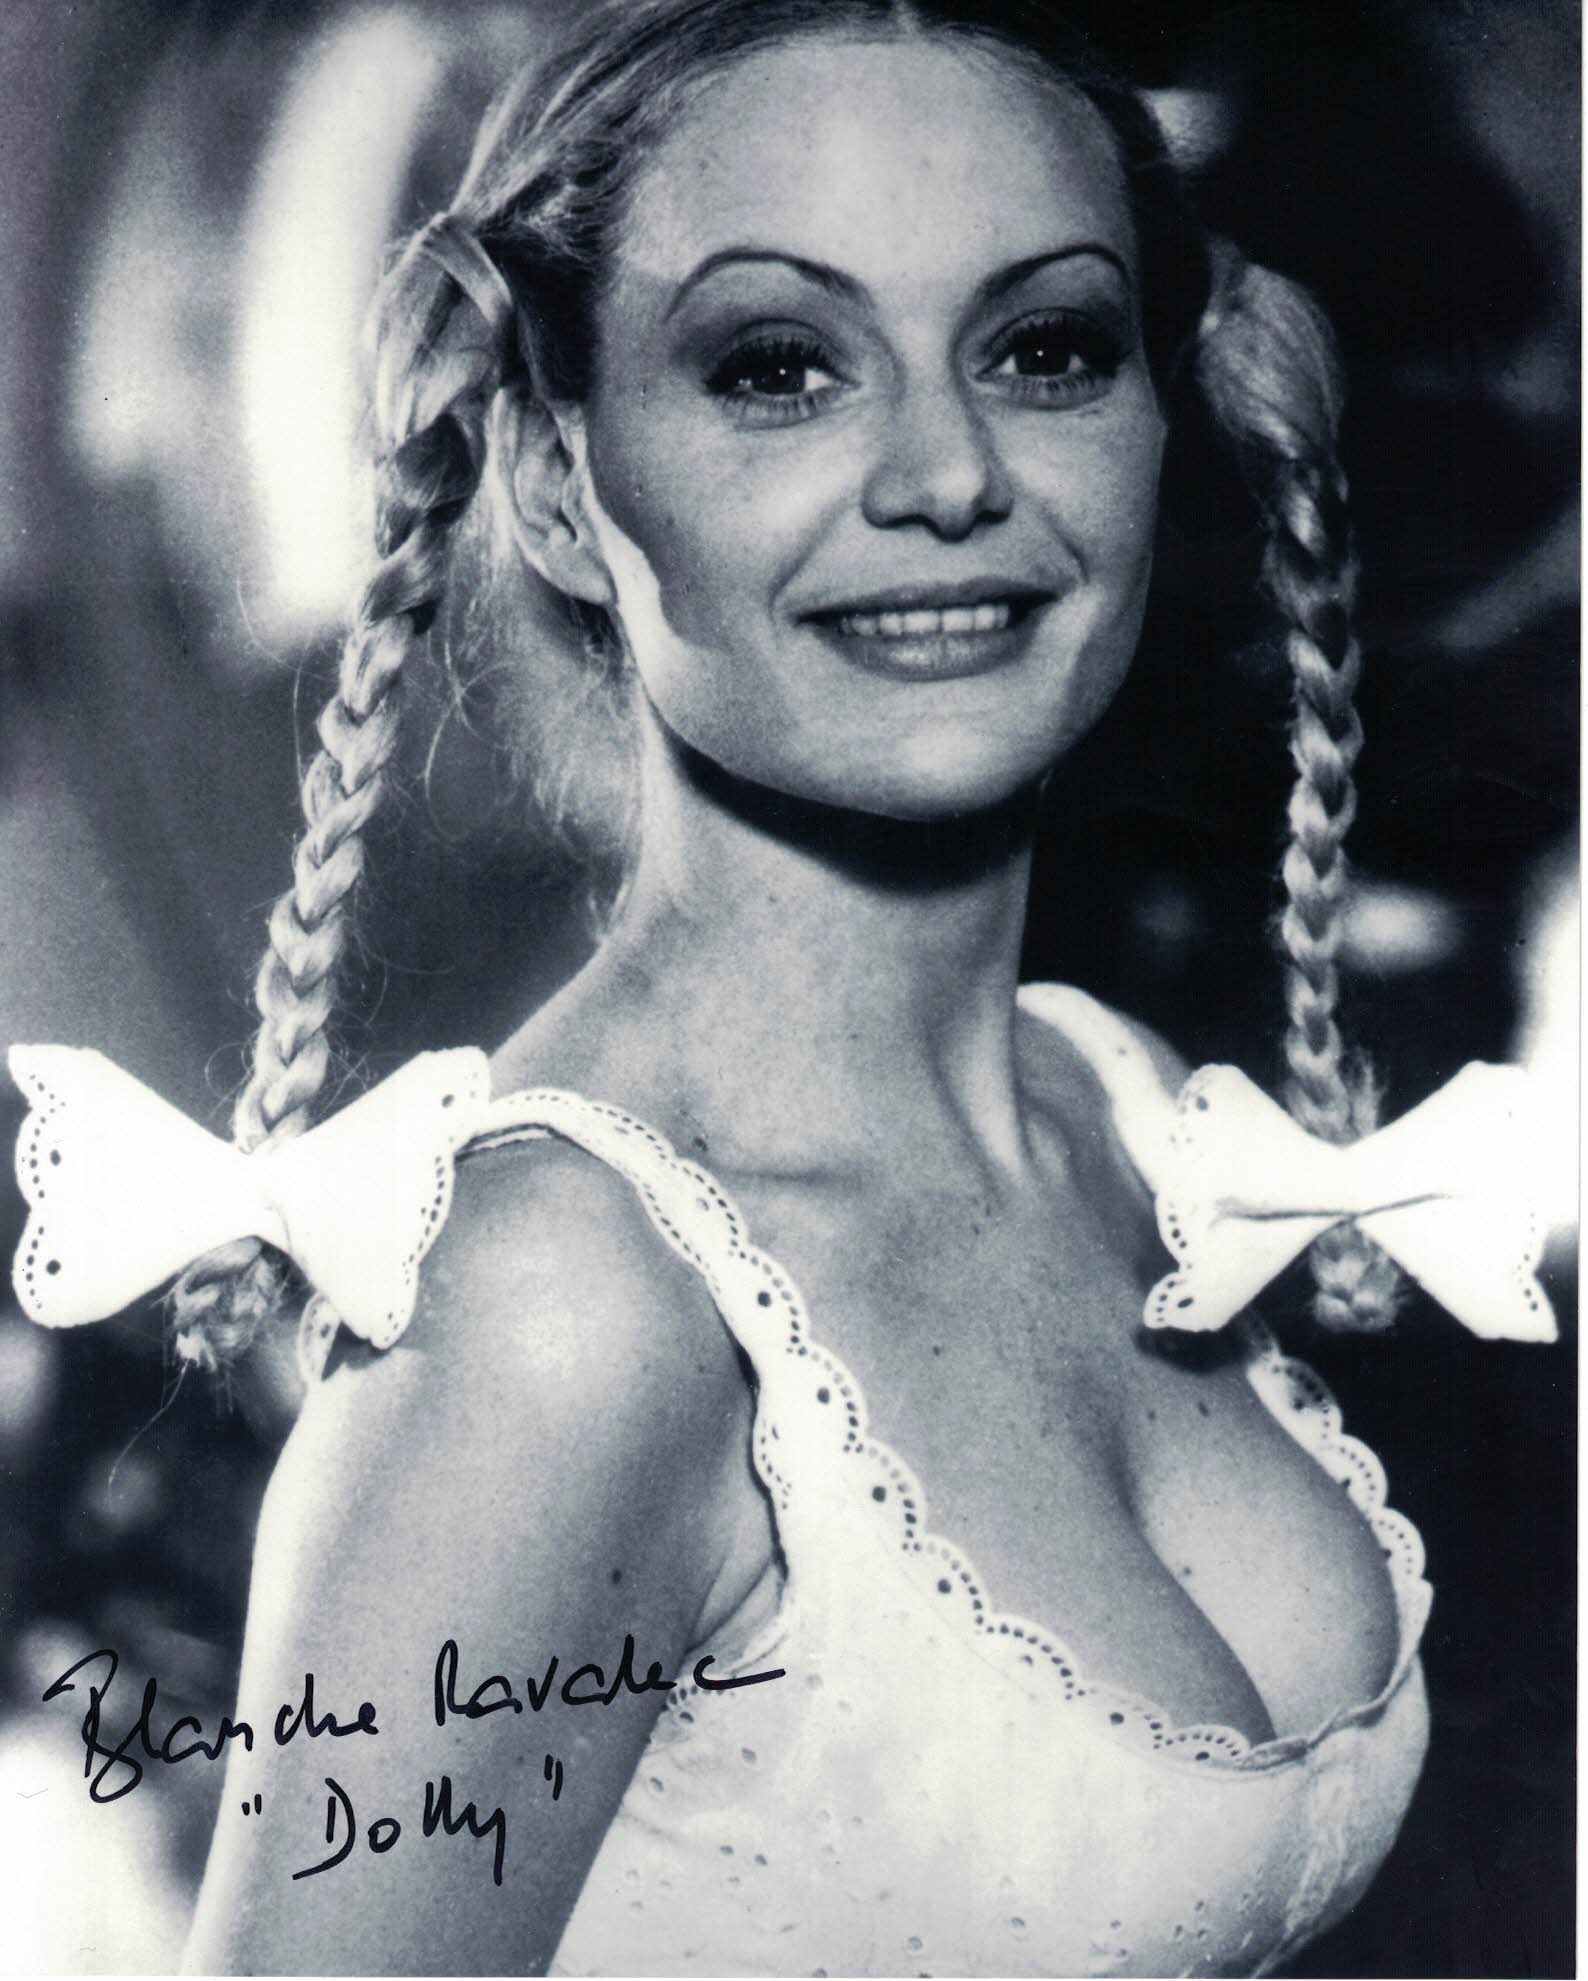 BLANCHE RAVALEC - Dolly from Moonraker - James Bond hand signed 10 x 8 photo